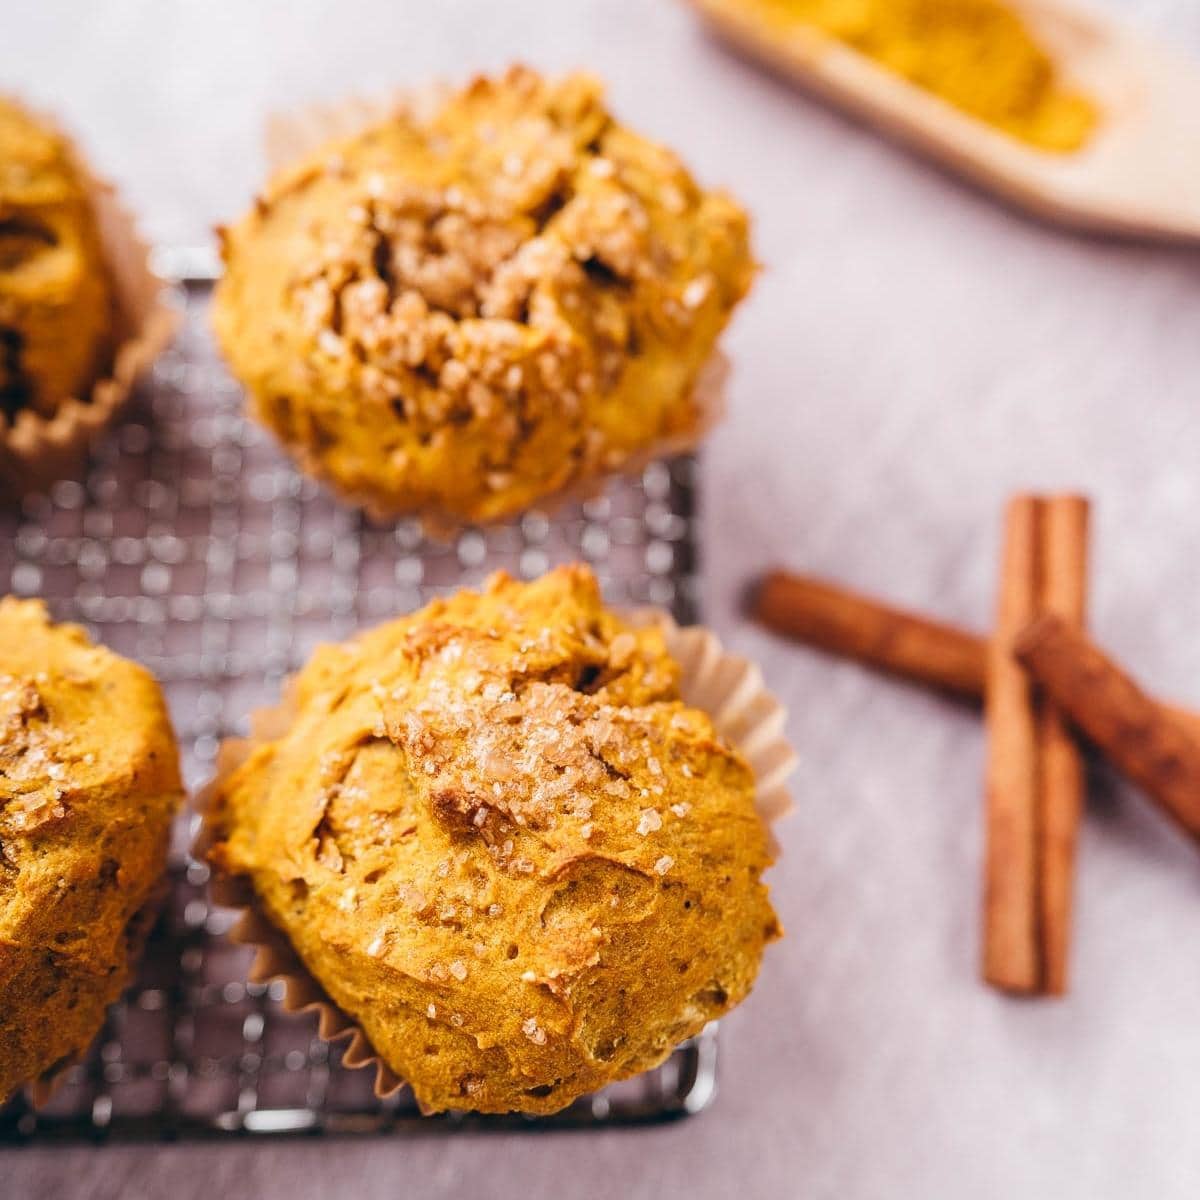 Gold muffins with a crunchy sugar topping resting on a silver metal rack.